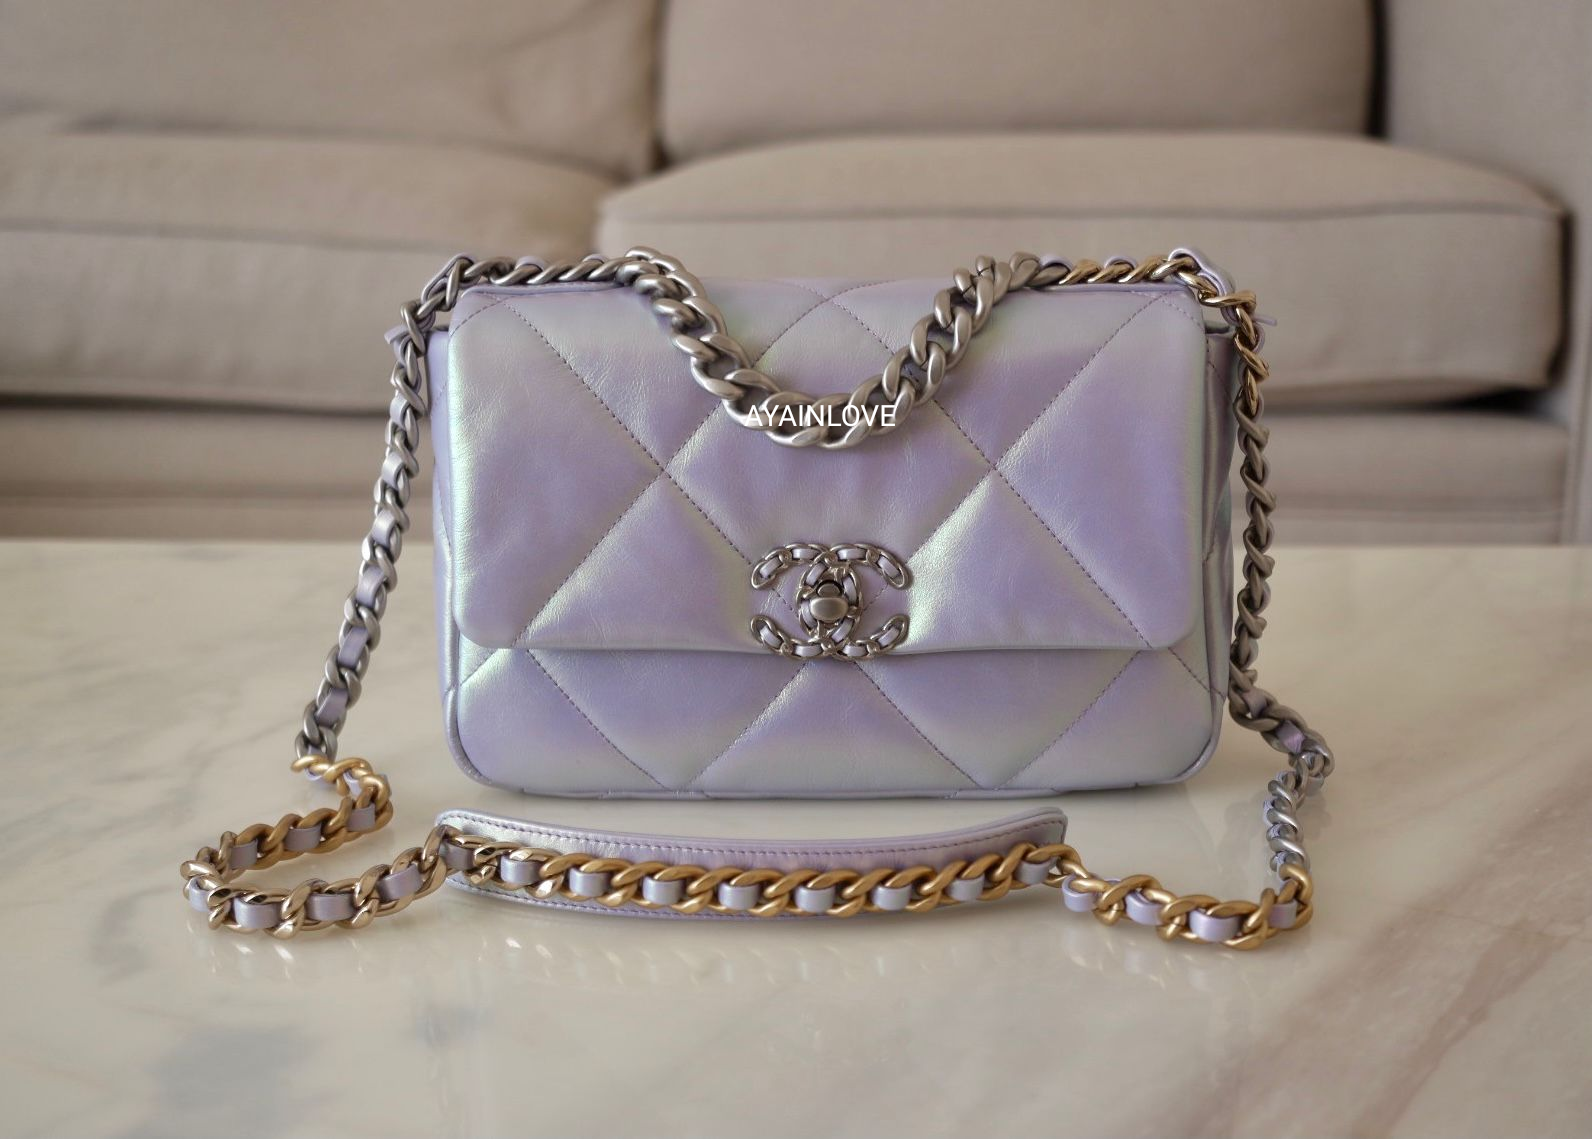 CHANEL Small Boy Bag Light Purple Quilted Patent Leather With Gold Hardware  -NEW